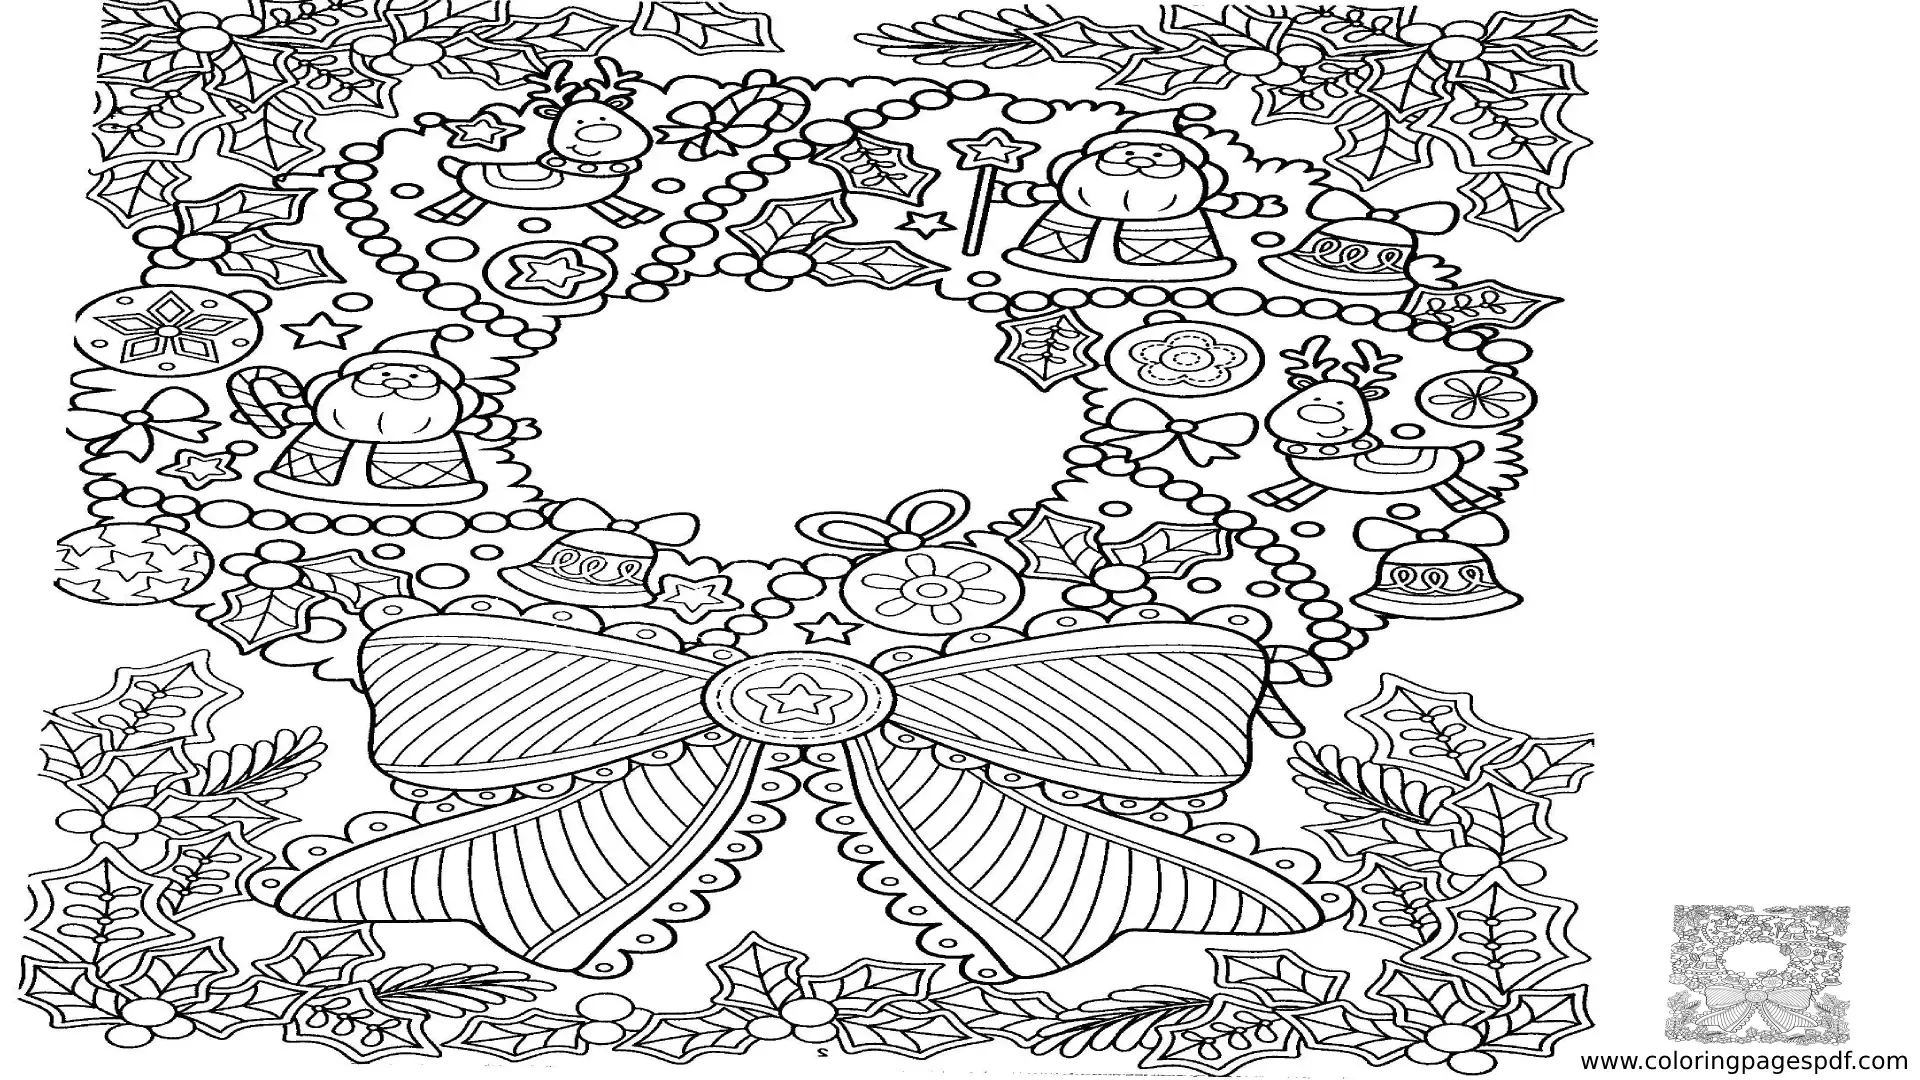 Coloring Page Of A Christmas Wreath